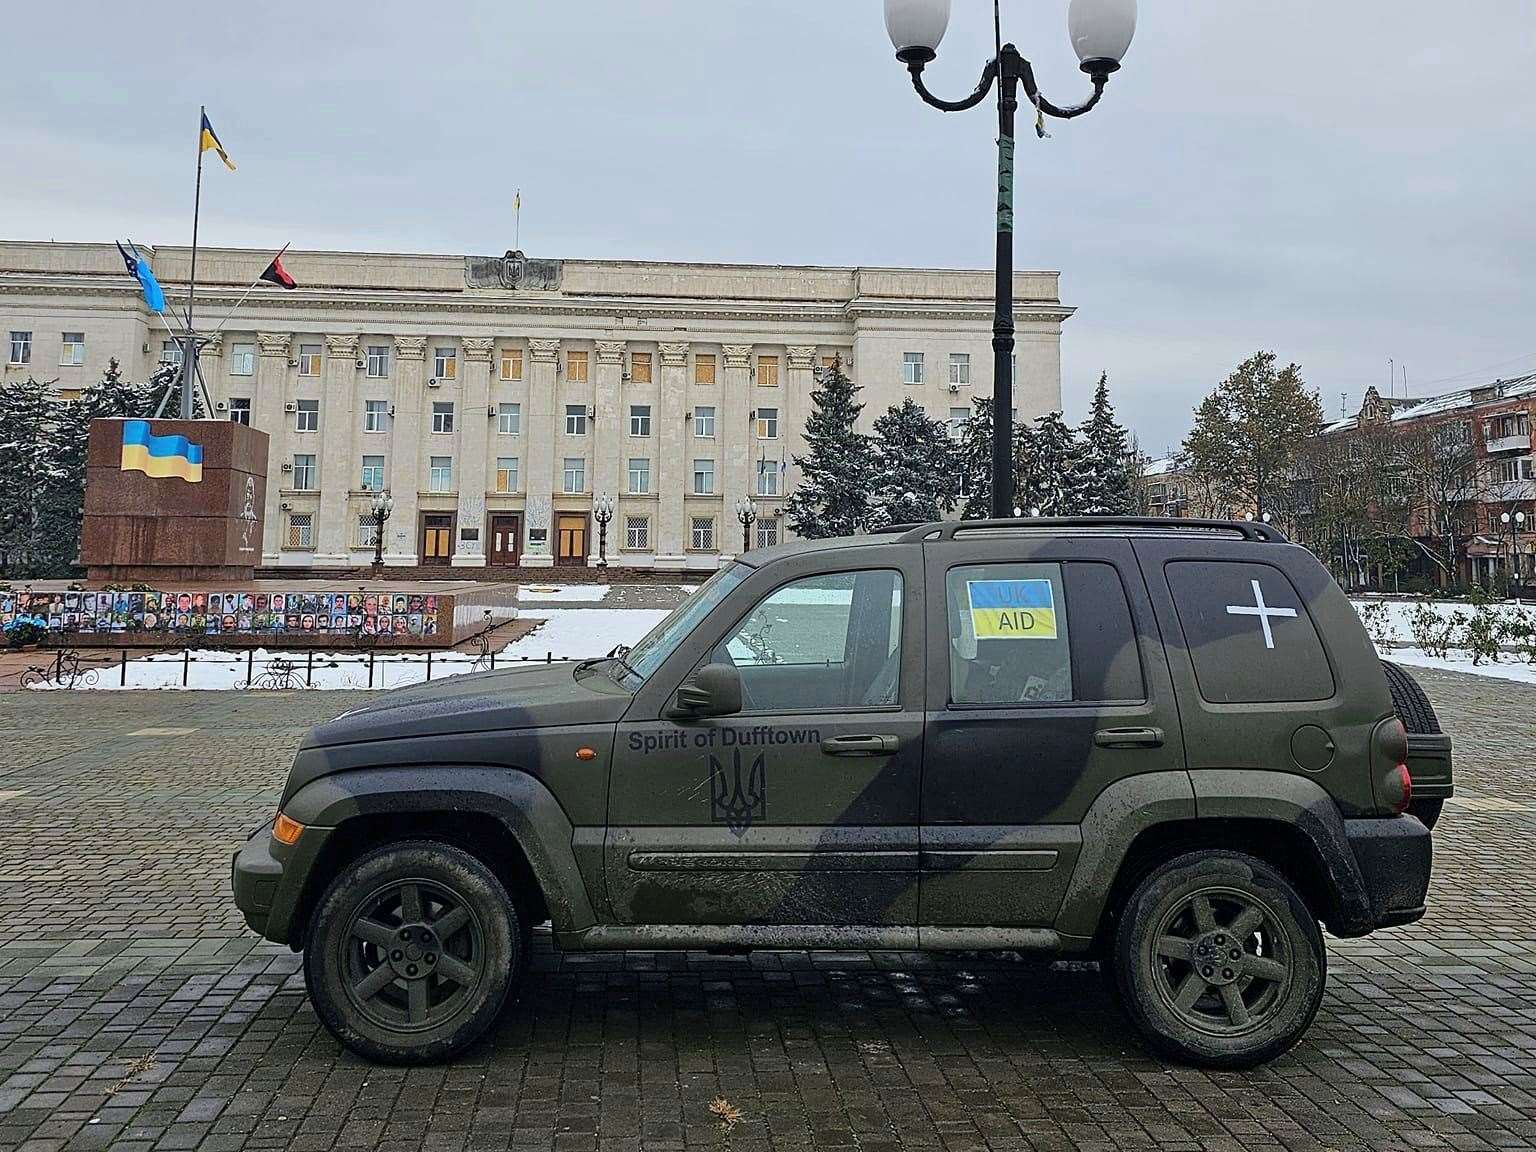 A vehicle named "The Spirit of Dufftown" in Ukraine delivered by Andrew.